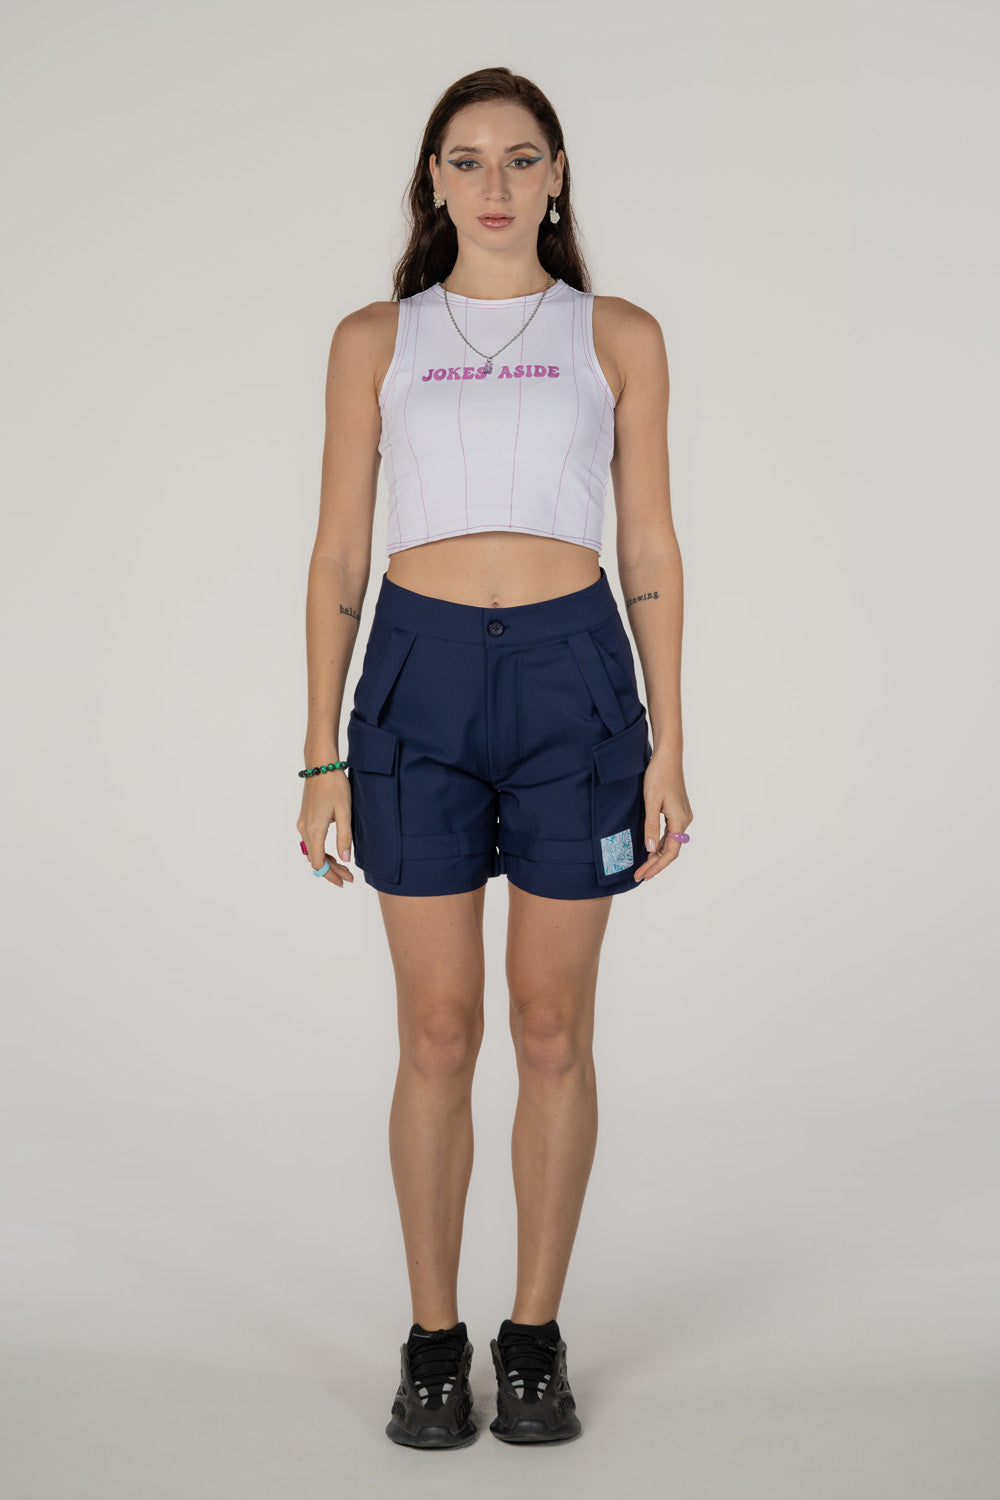 White Crop Top with Pink Stitching and Embroidery